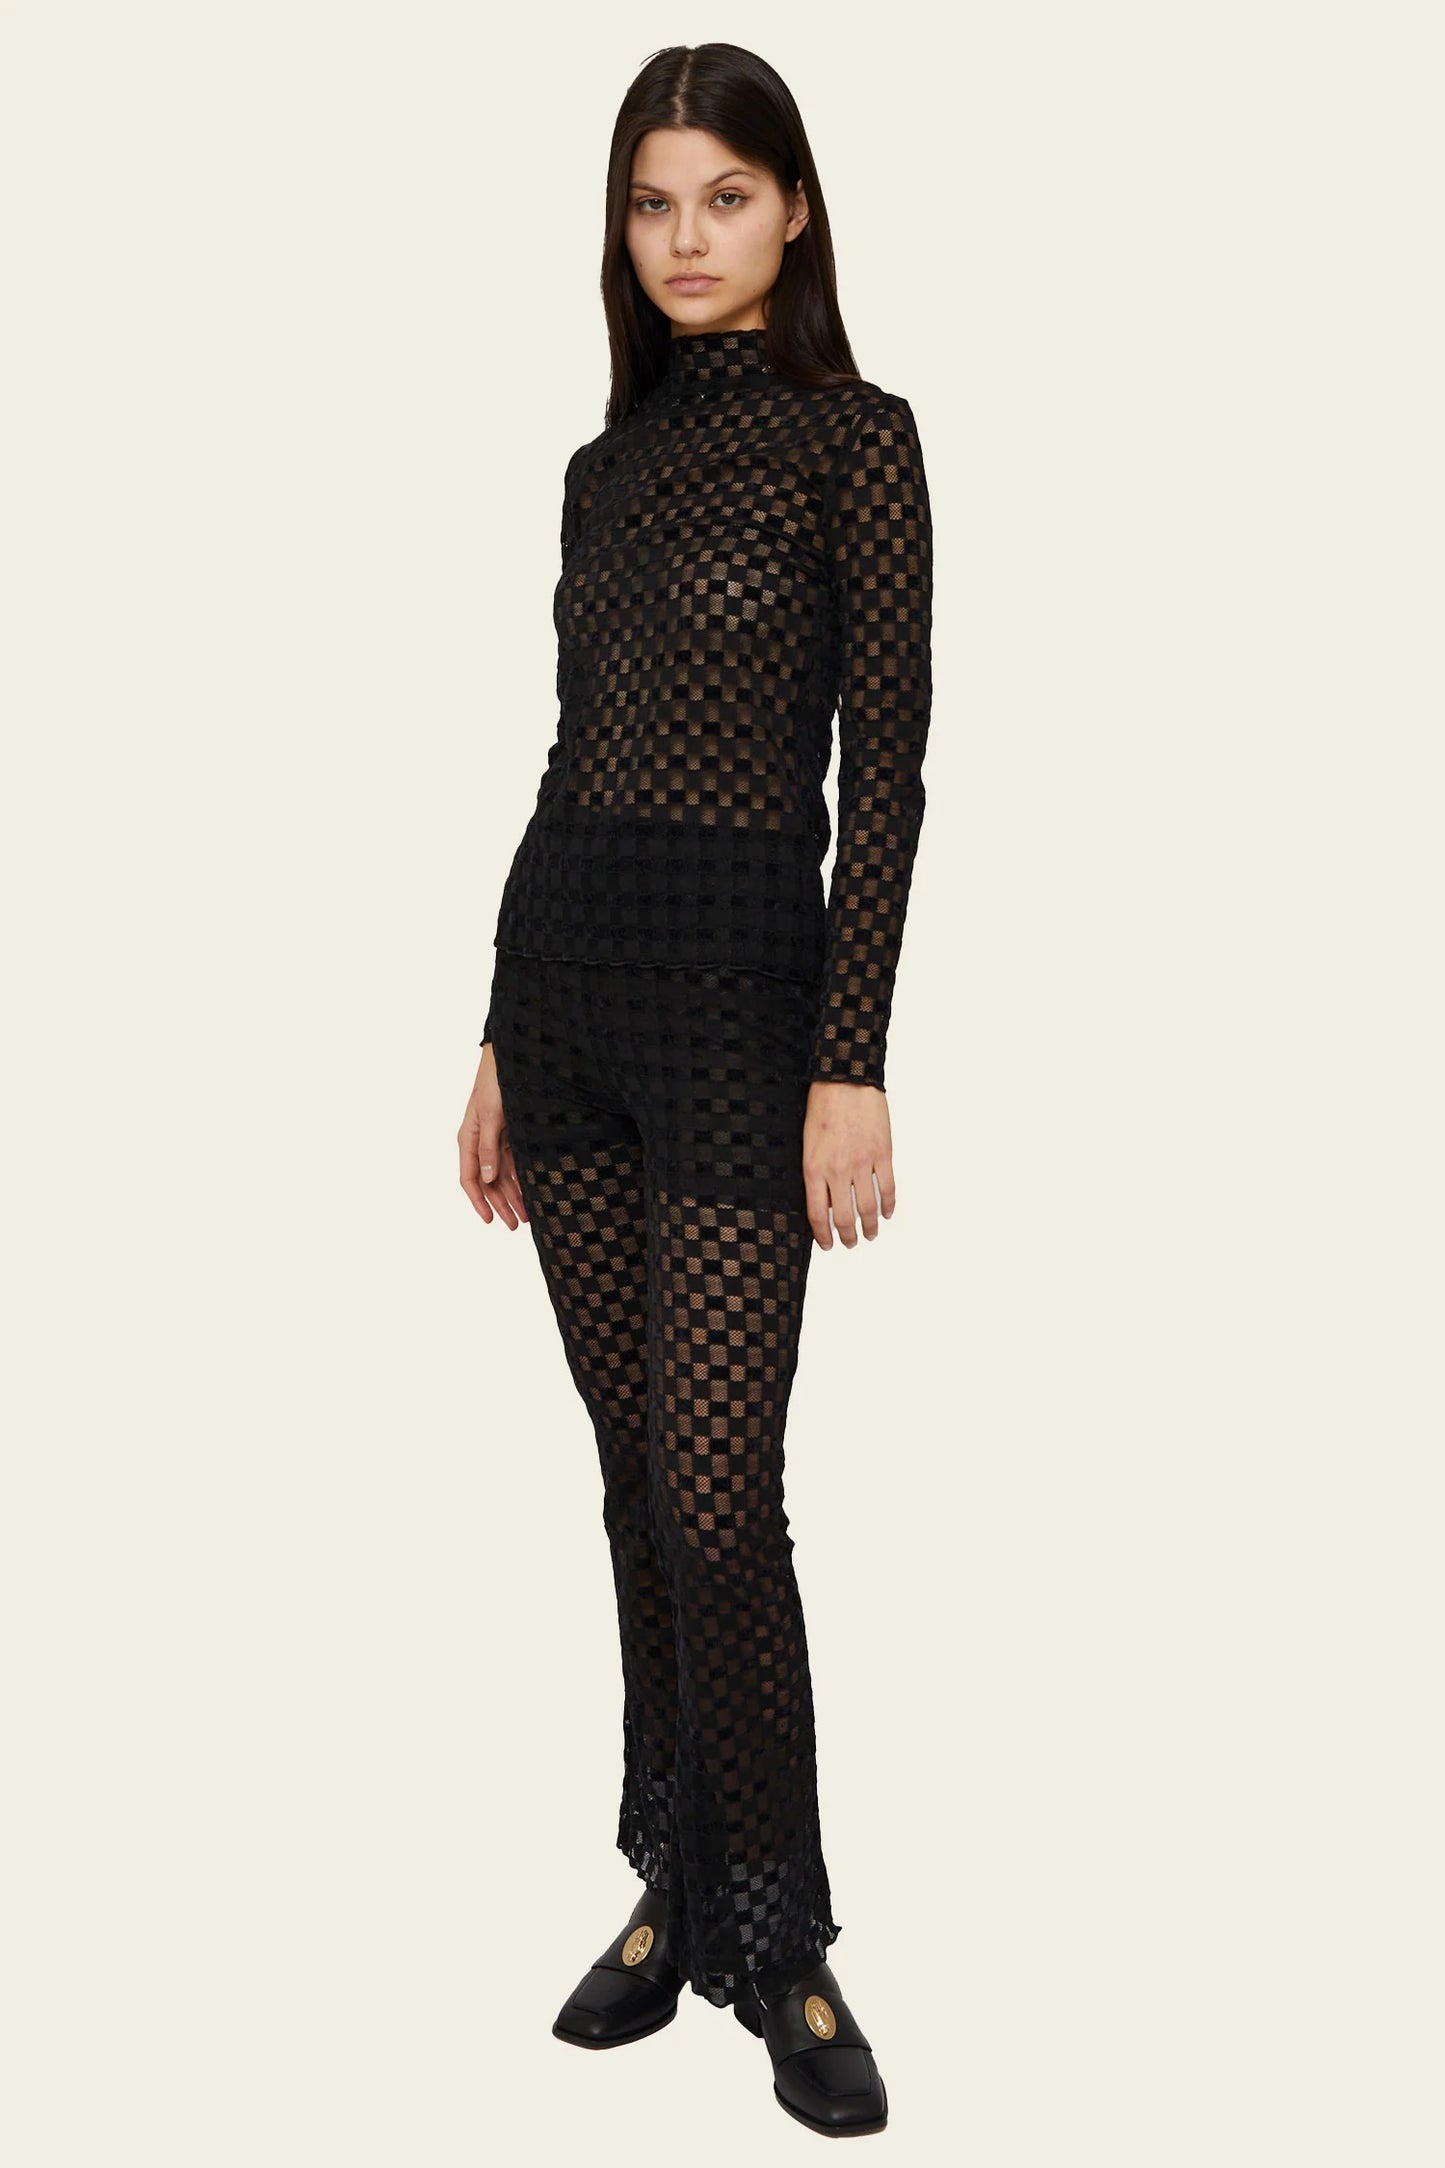 Find Me Now | Harmony Checkered Mesh Top - Black